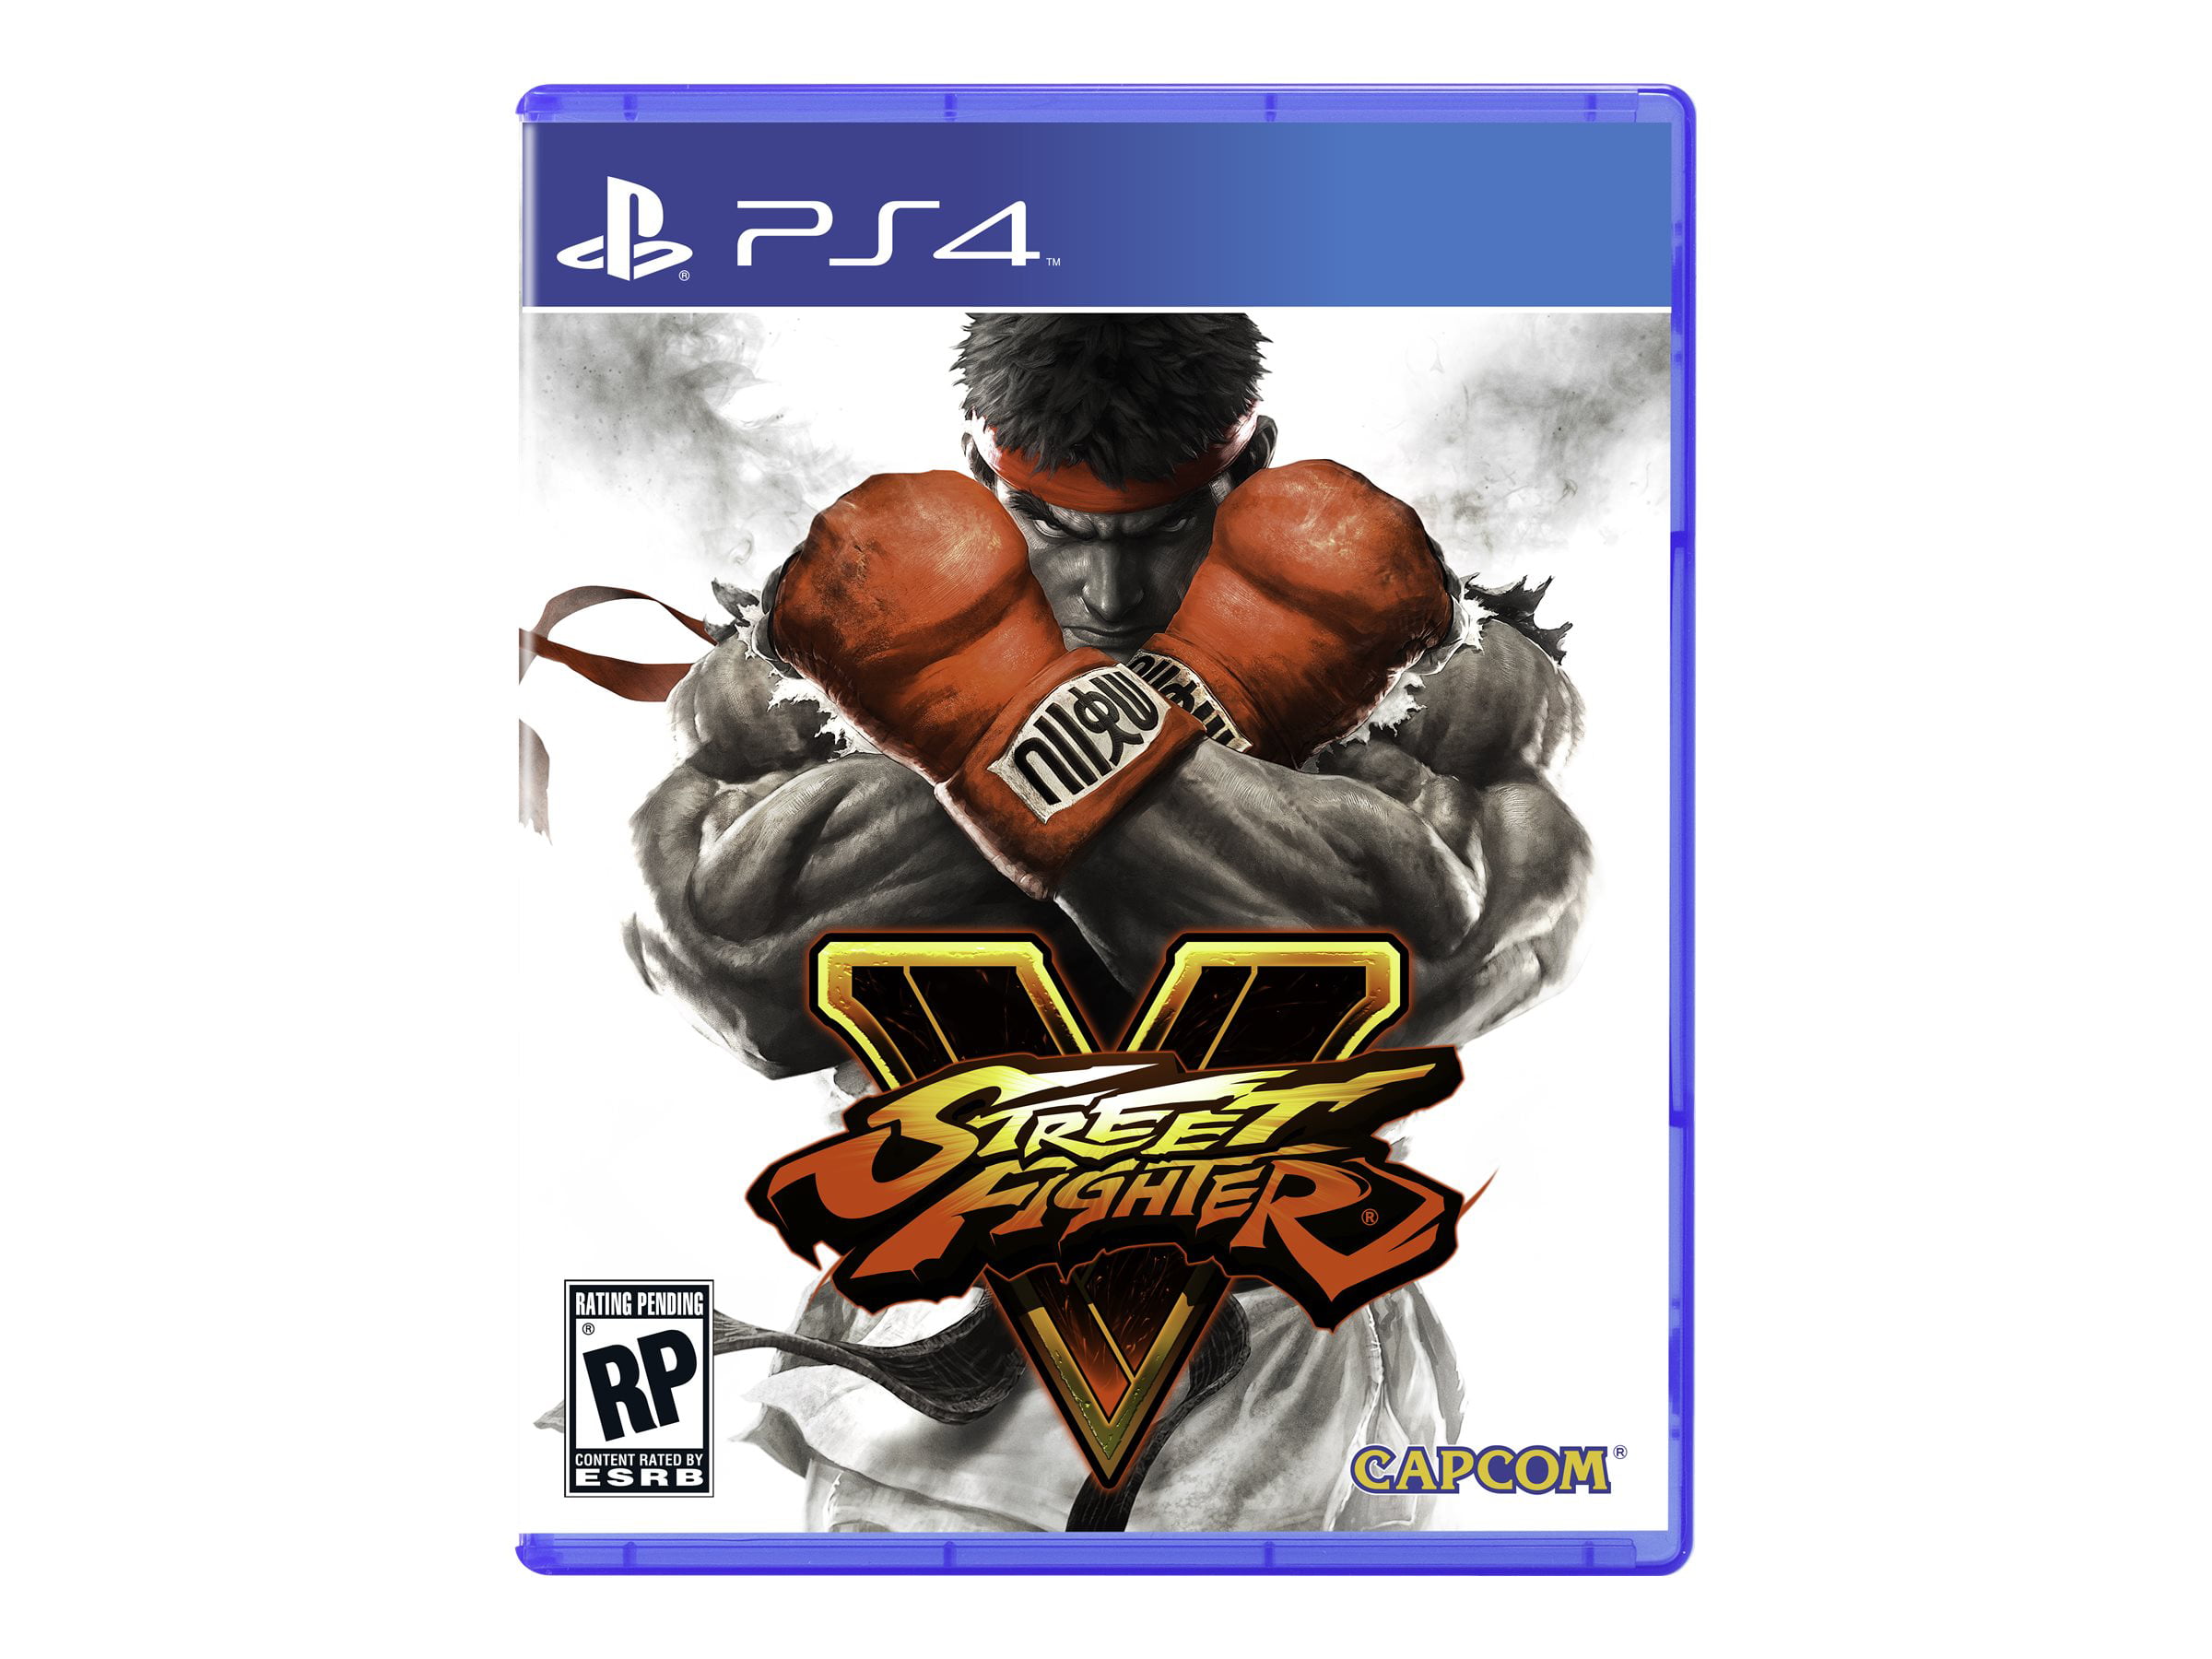 Street Fighter V: Playstation Hits (PS4) - XPRS